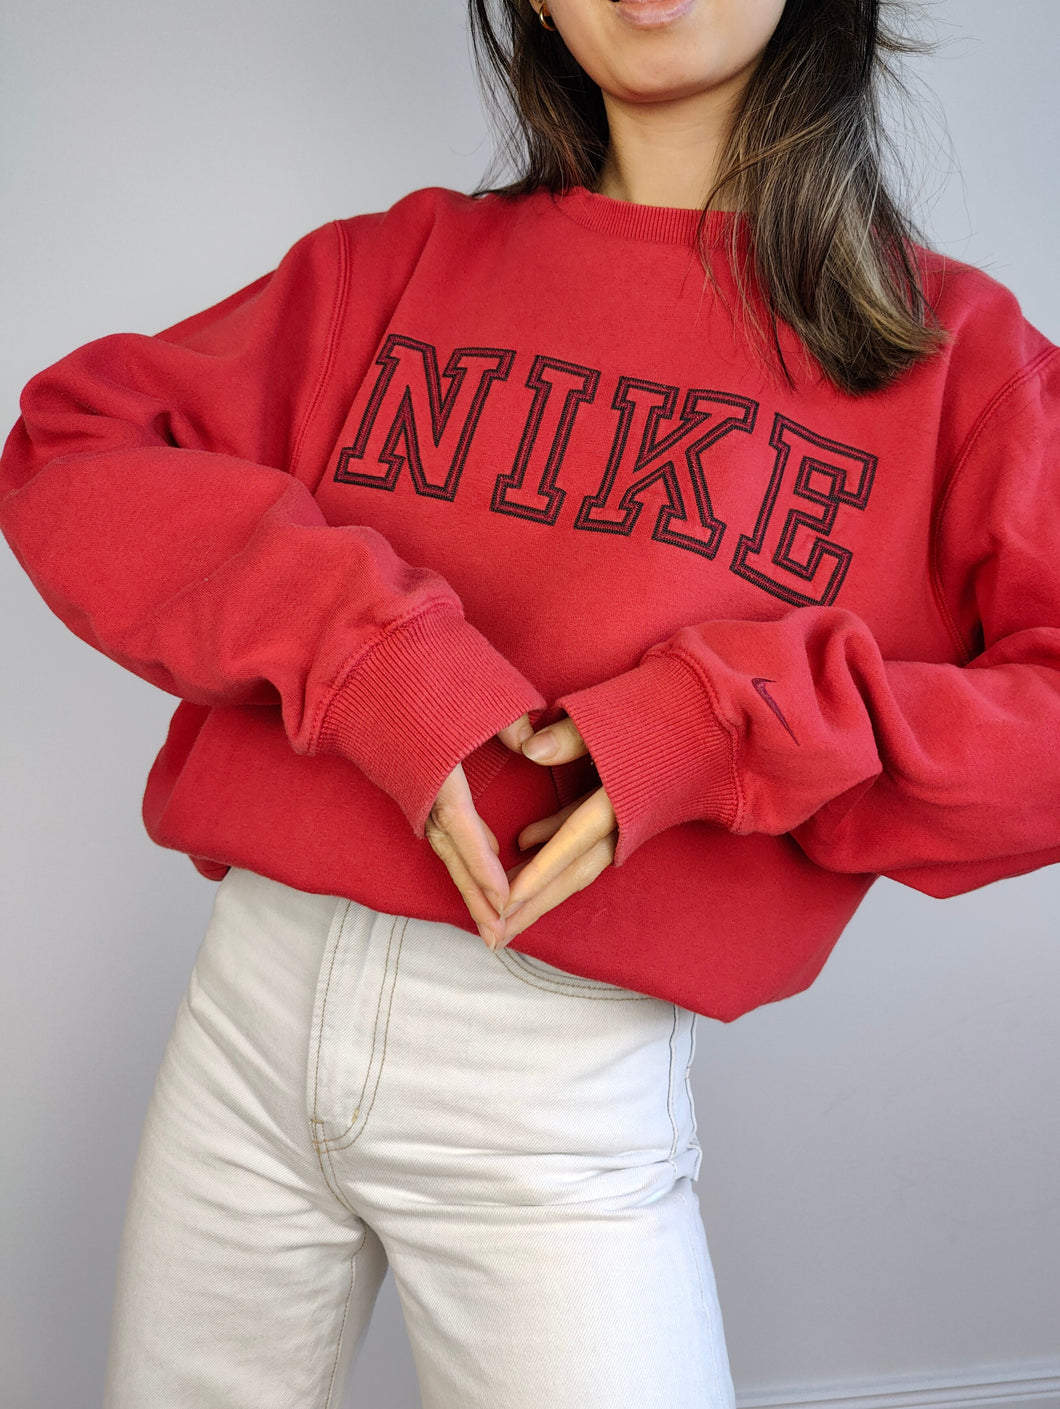 The Nike Spell Out Red Sweatshirt | Vintage red Nike embroidery logo sweater pullover crewneck women men unisex L